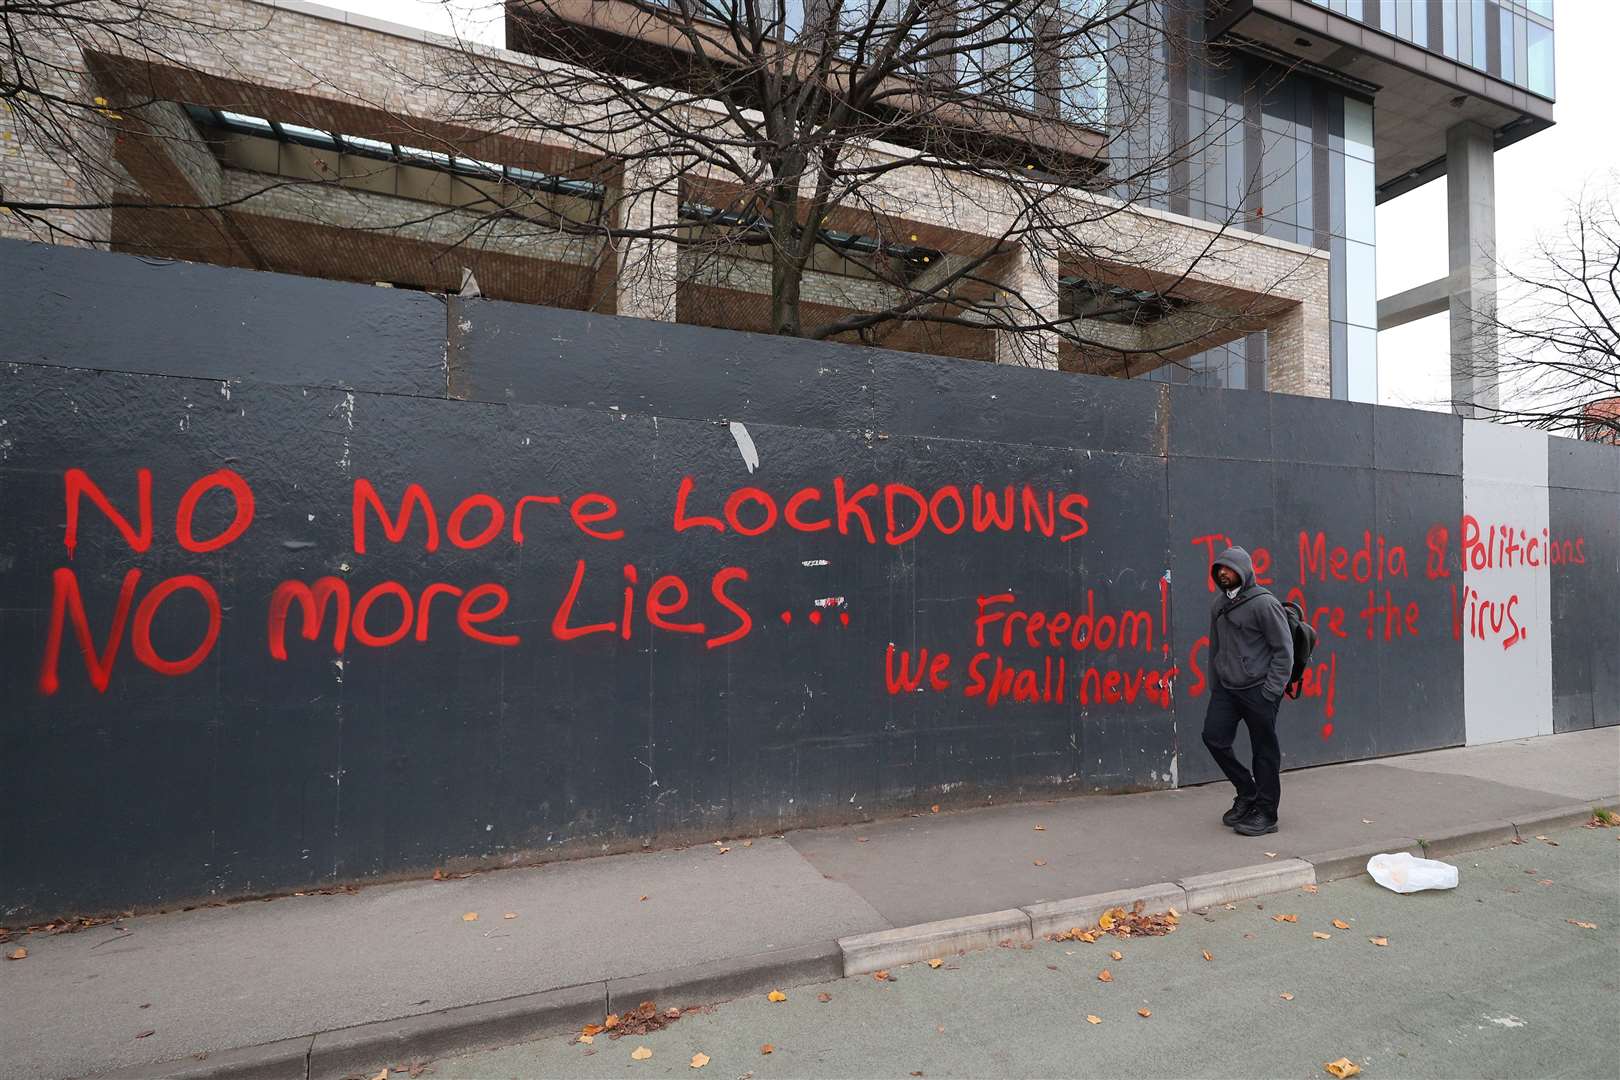 A man walks past anti-lockdown graffiti in Manchester (Peter Byrne/PA Images)